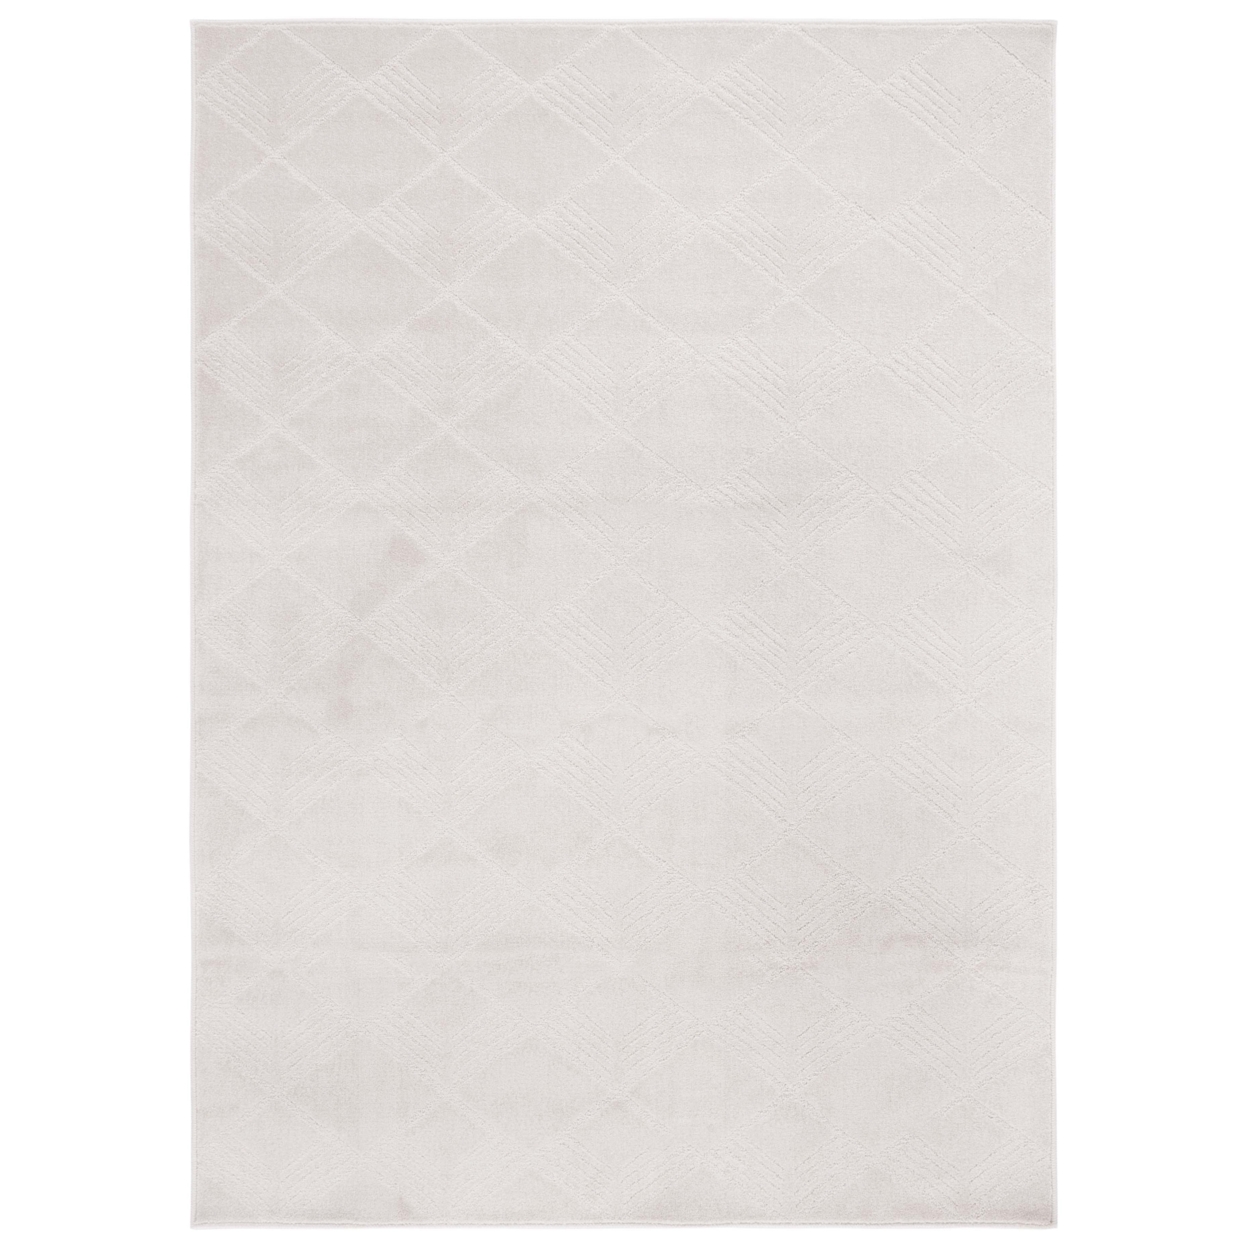 Safavieh PNS414A Pattern And Solid Ivory - Grey / Ivory, 5'-3 X 5'-3 Square